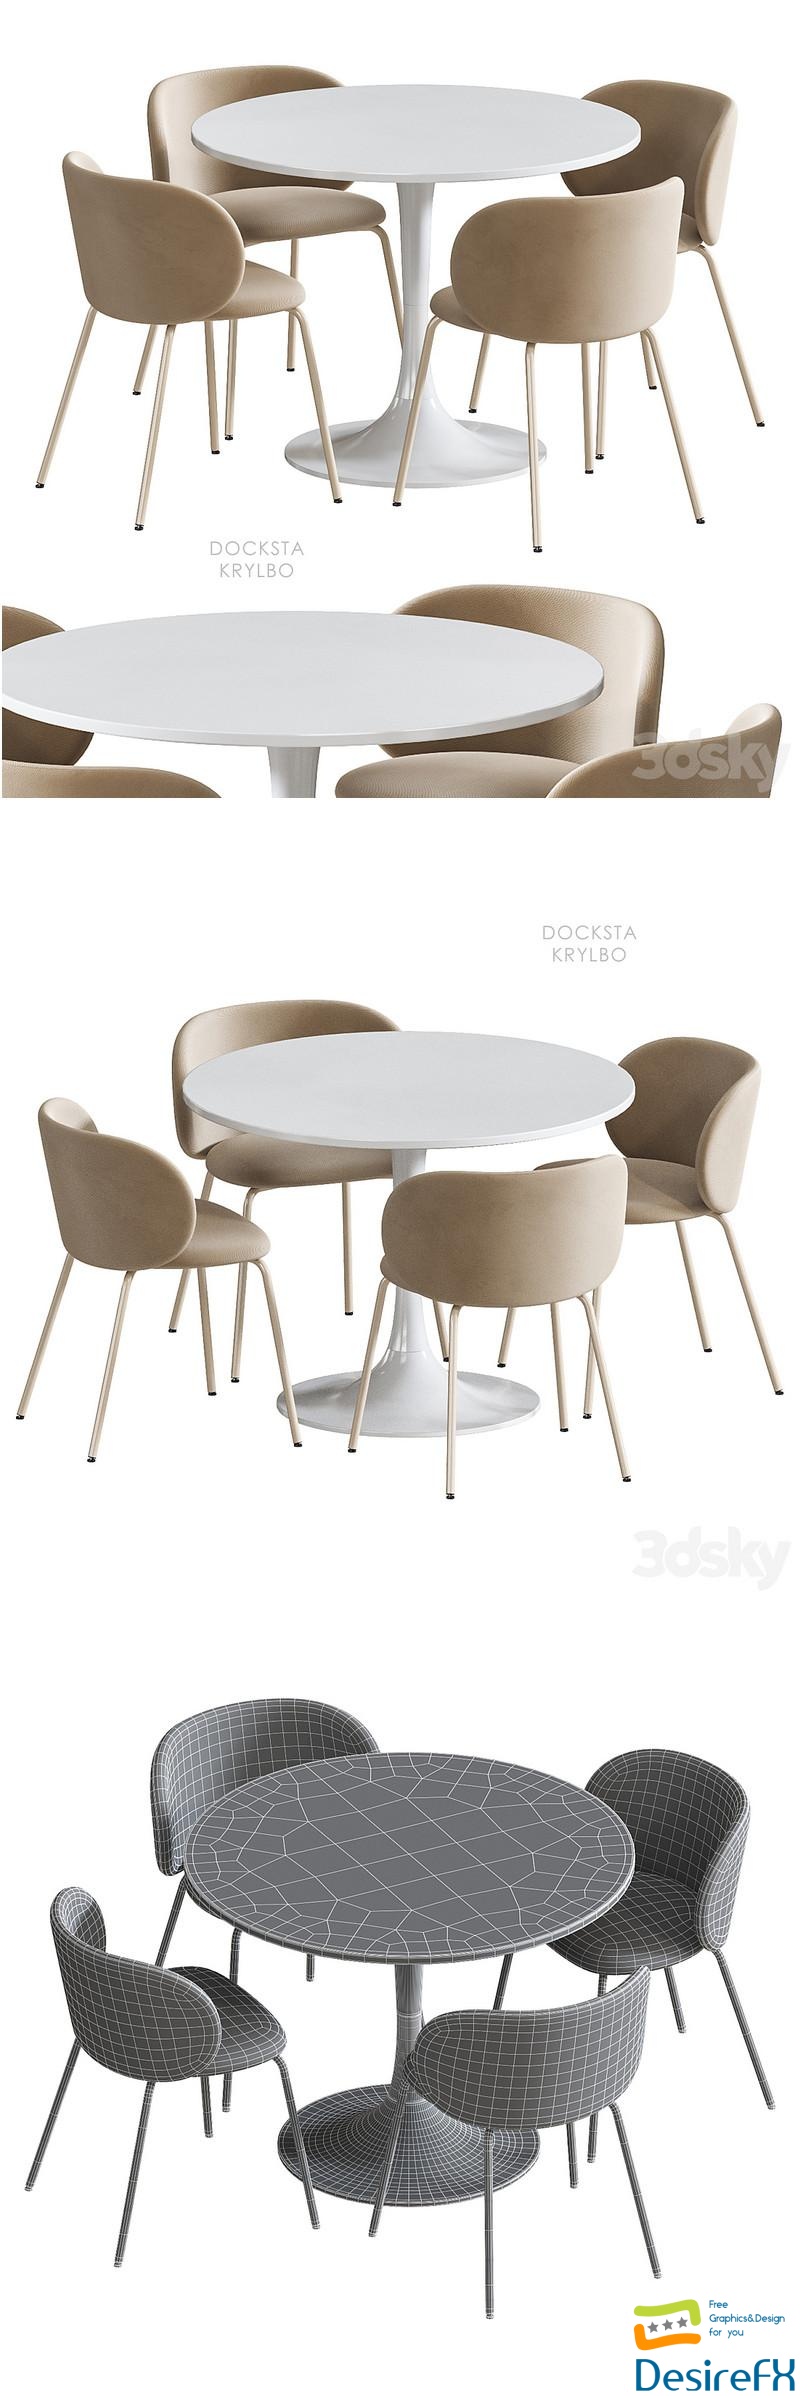 IKEA DOCKSTA KRYLBO table and chairs 3D Model